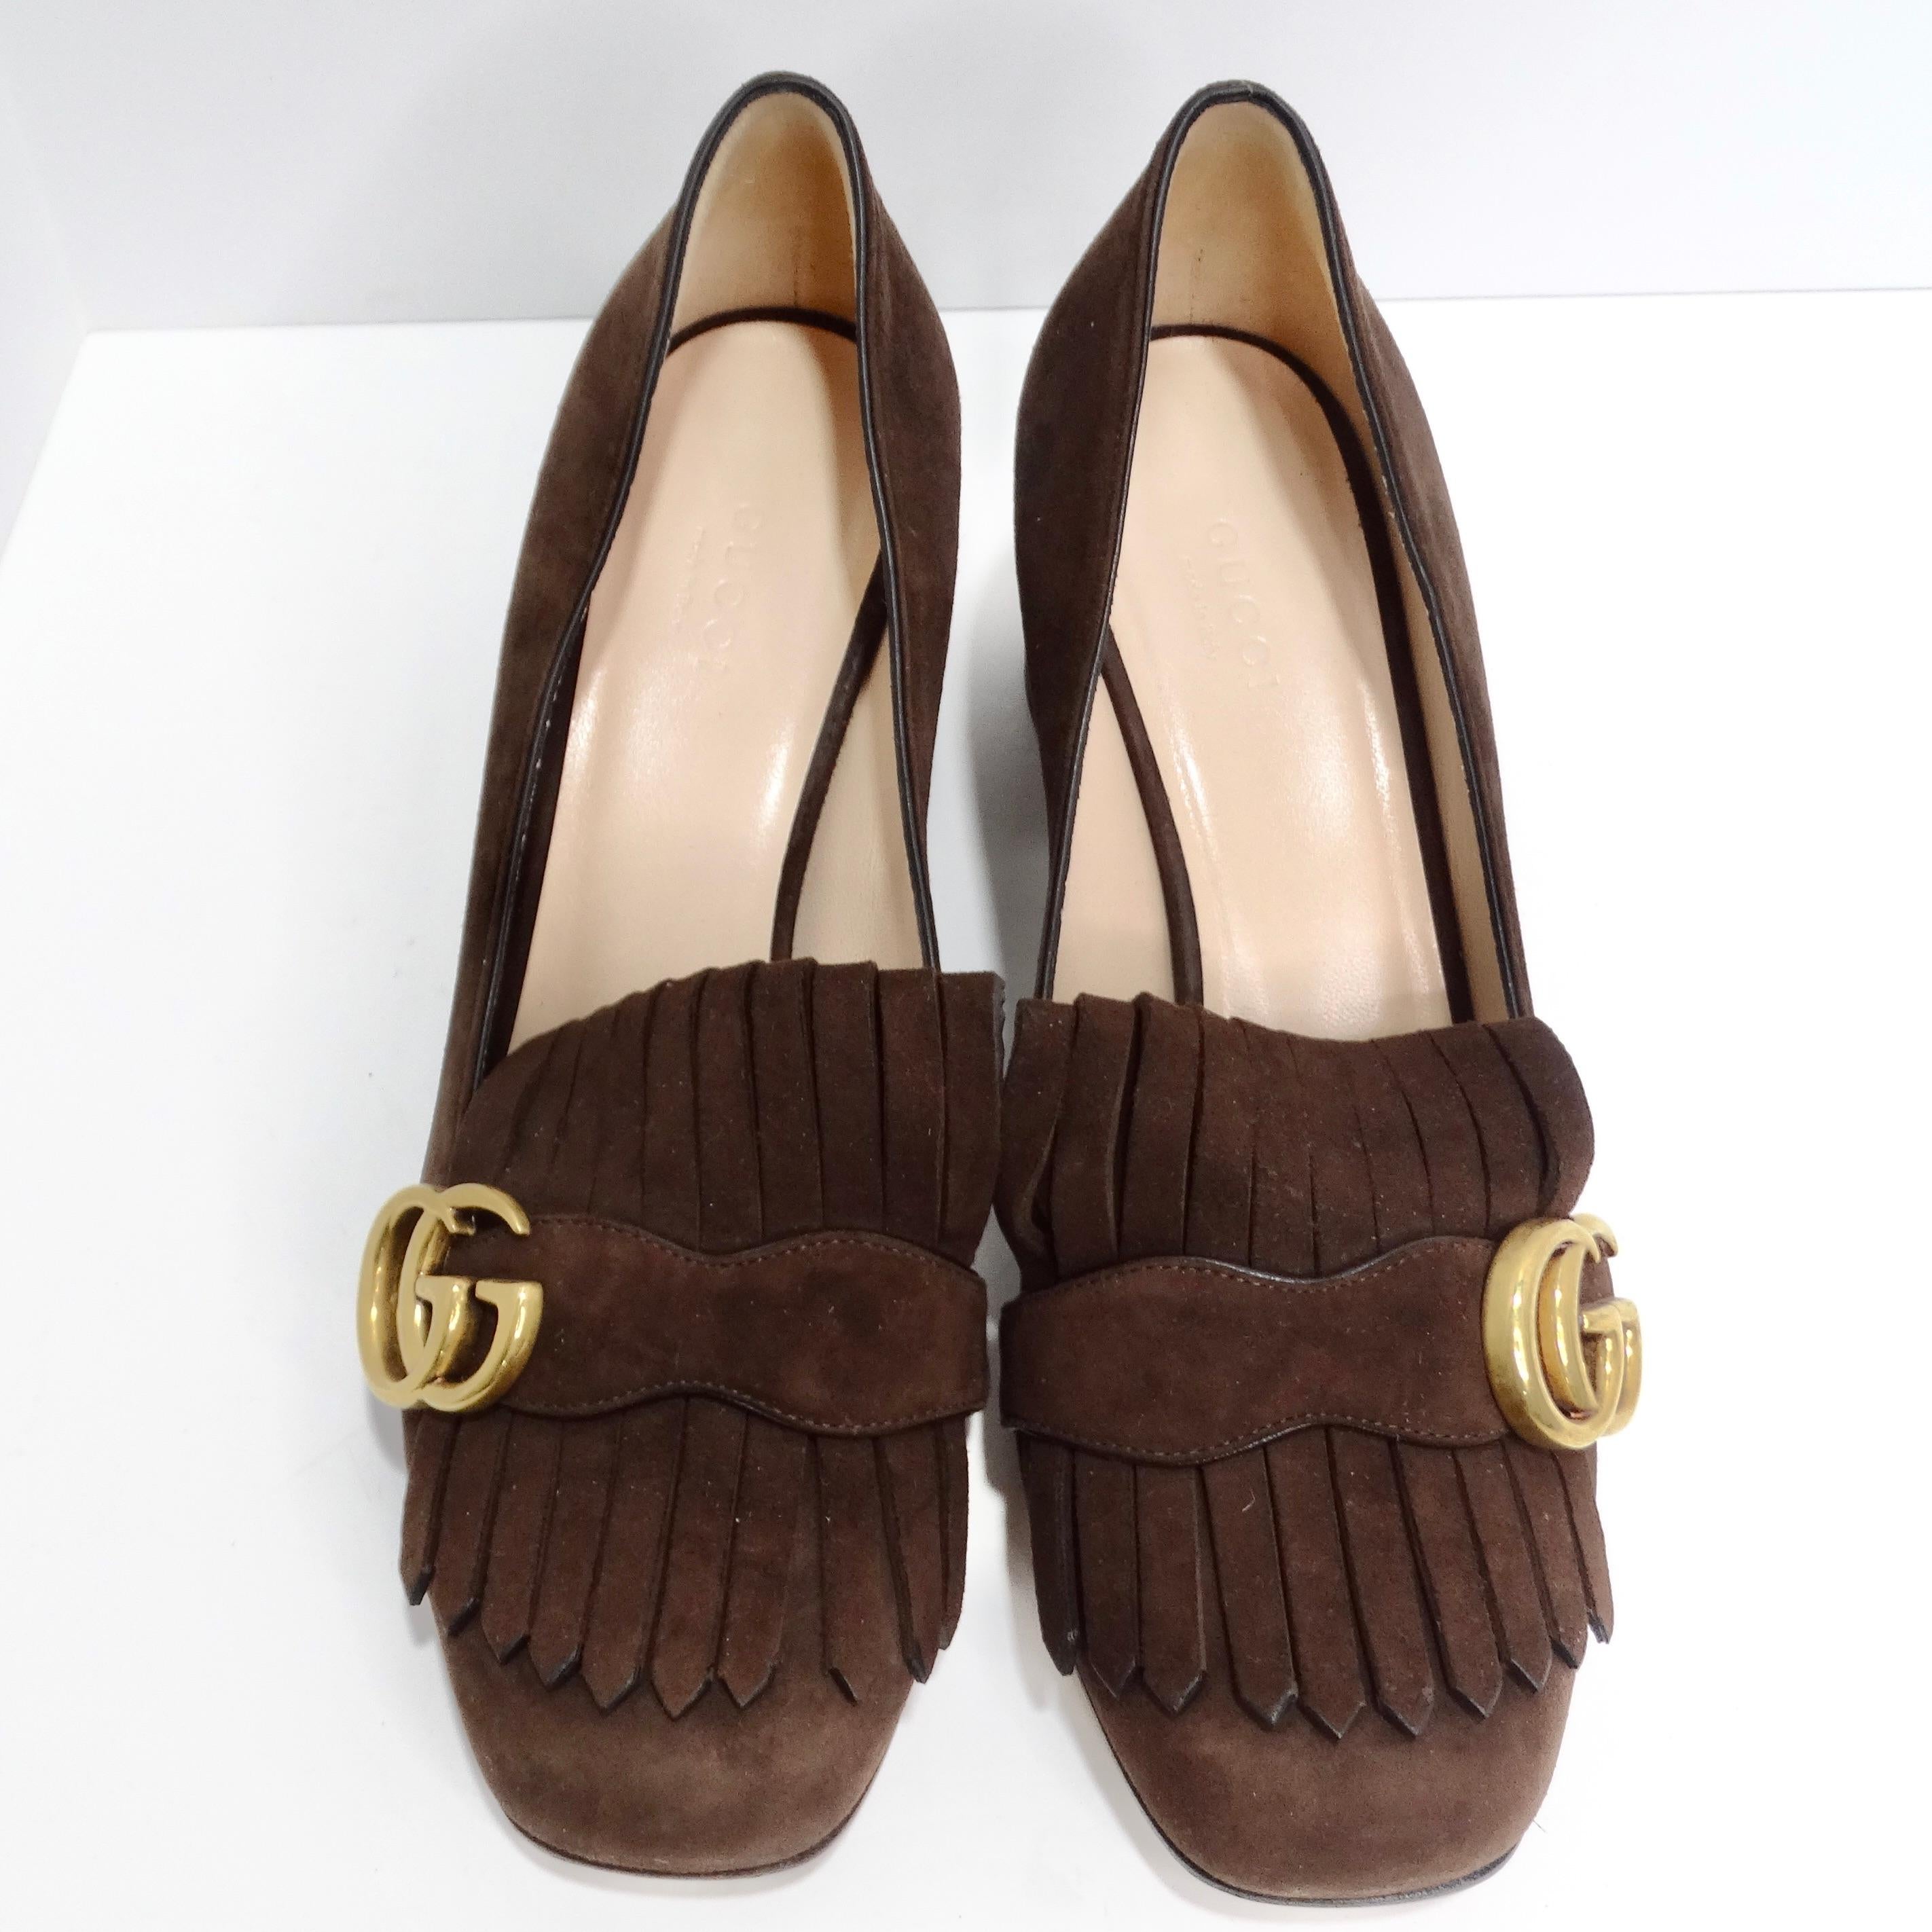 Introducing the Gucci Marmont Mid-Heel Fringe Pumps in Brown Suede, a perfect fusion of classic Gucci sophistication and timeless elegance that will elevate your footwear game to new heights. These mid-heel pumps beautifully blend classic Gucci